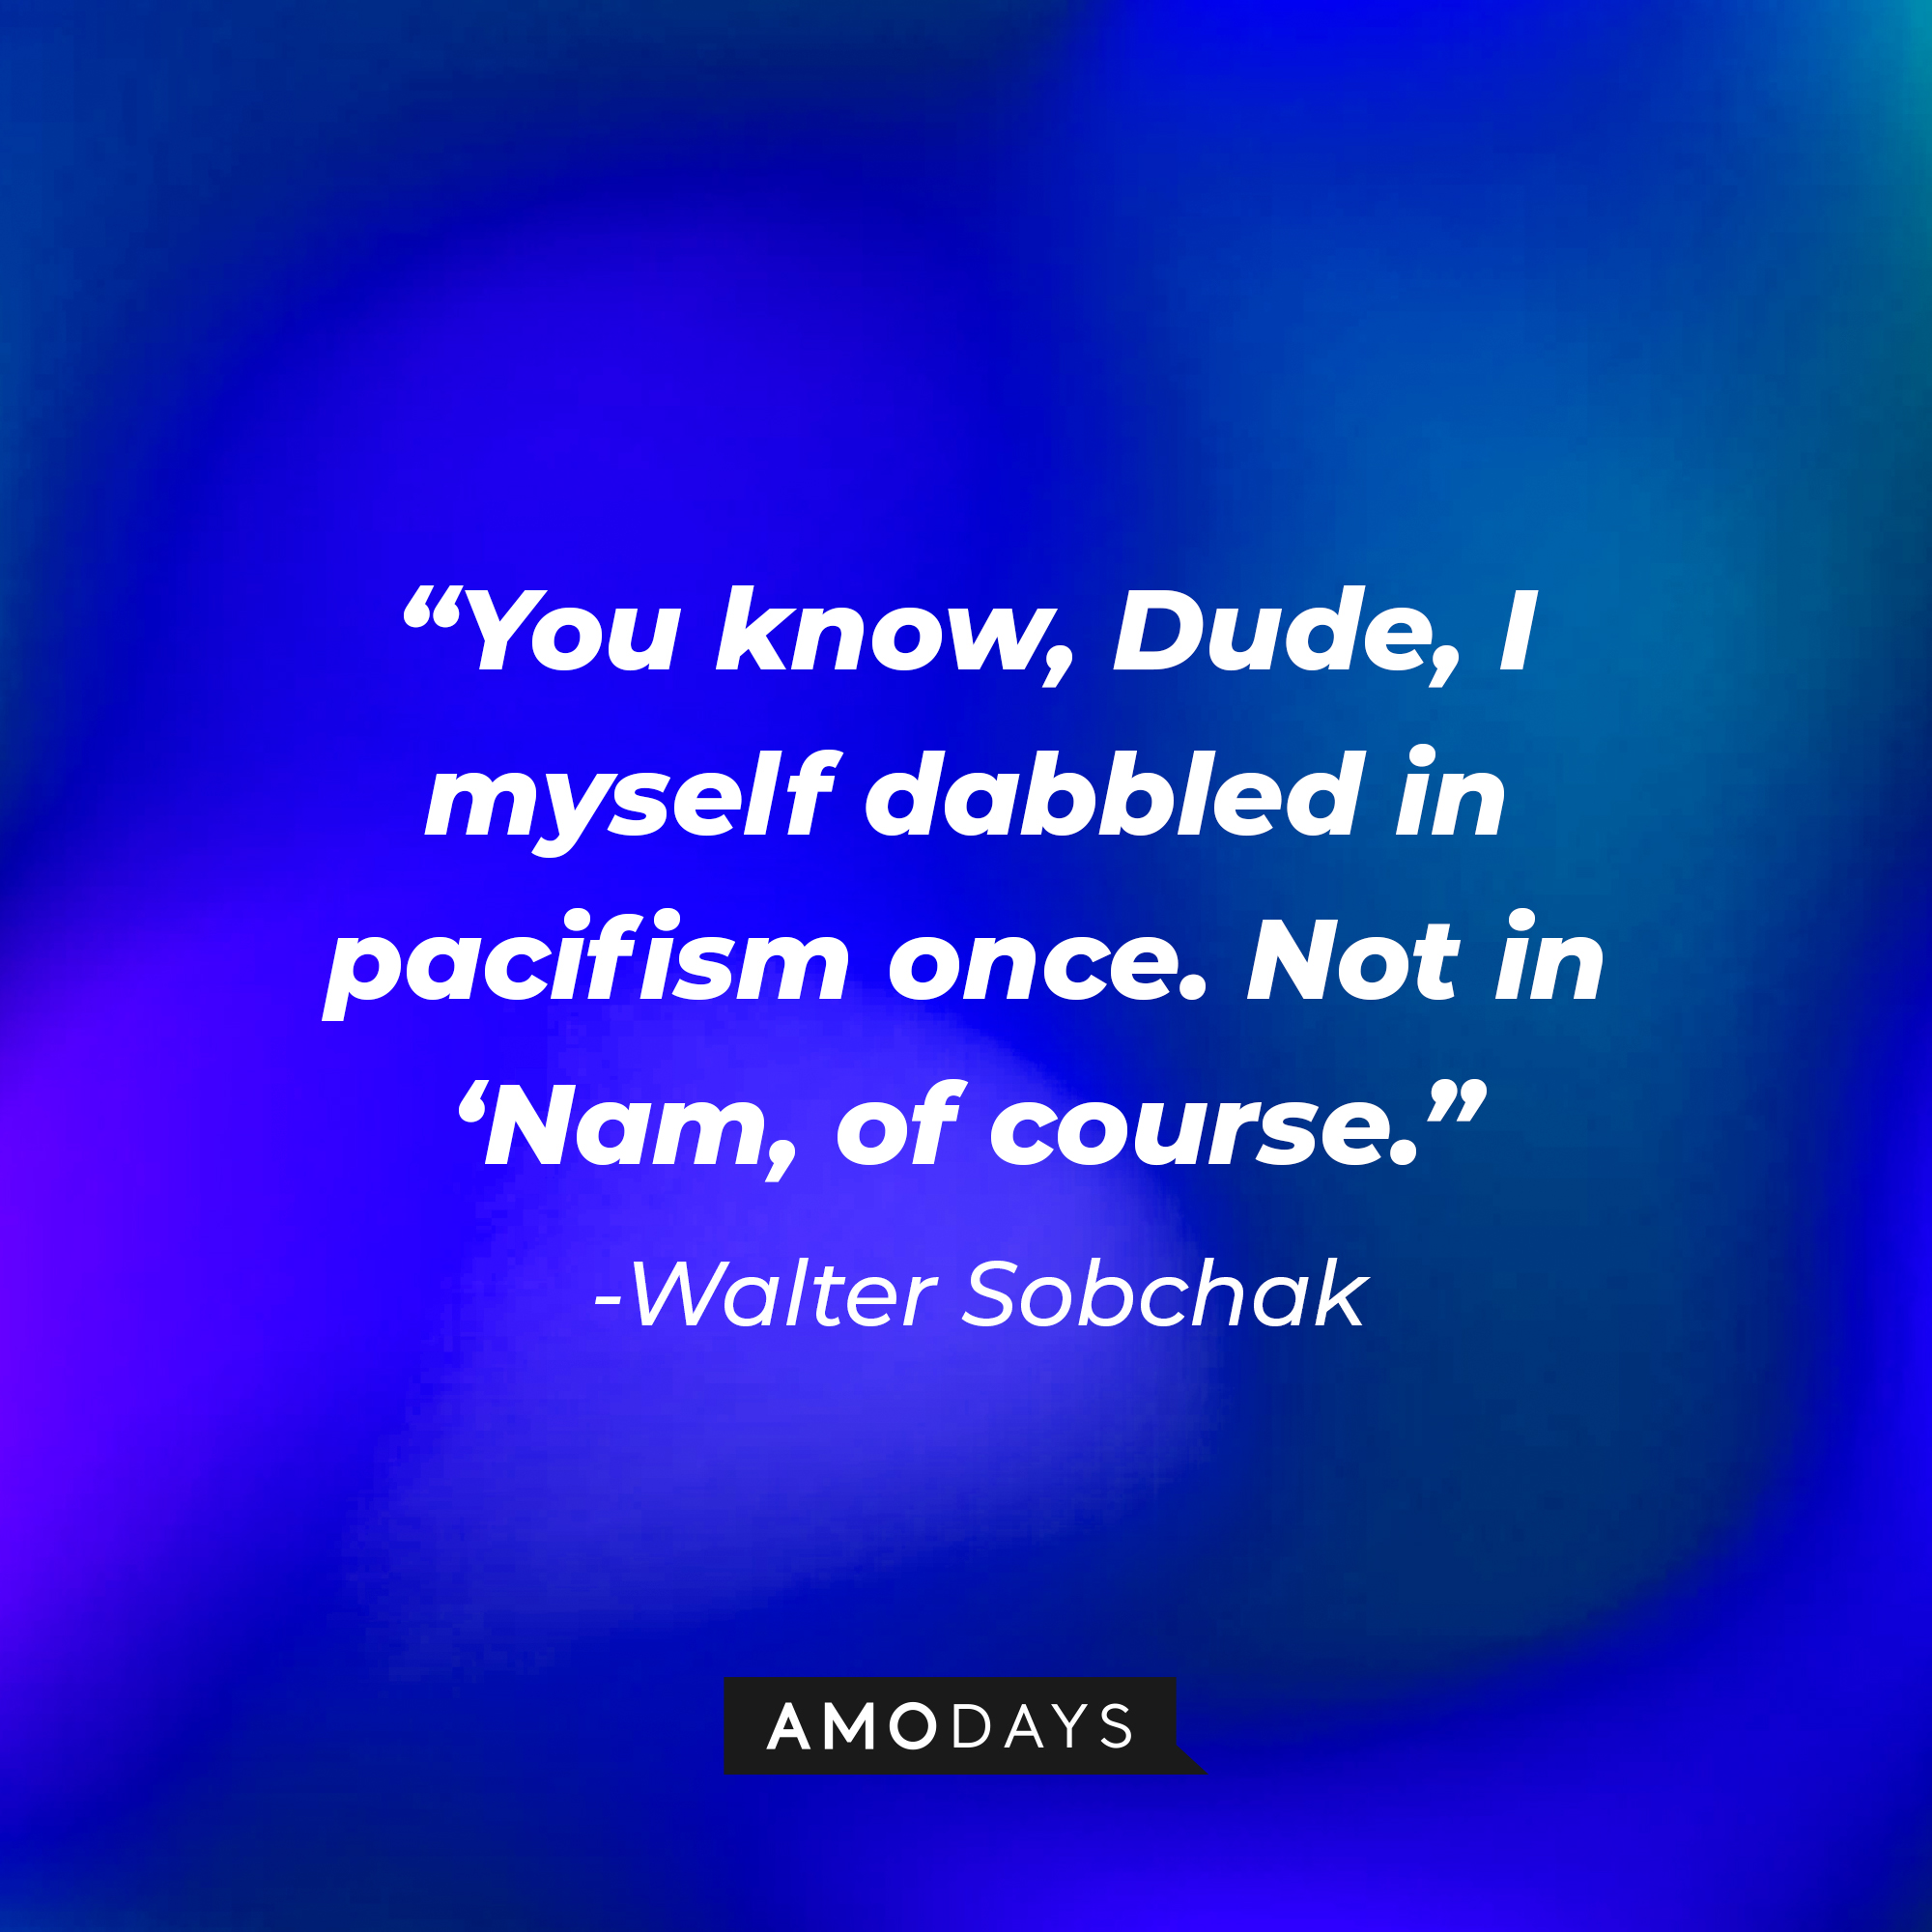 Walter Sobchak’s quote: “You know, Dude, I myself dabbled in pacifism once. Not in ‘Nam, of course.” | Source: AmoDays